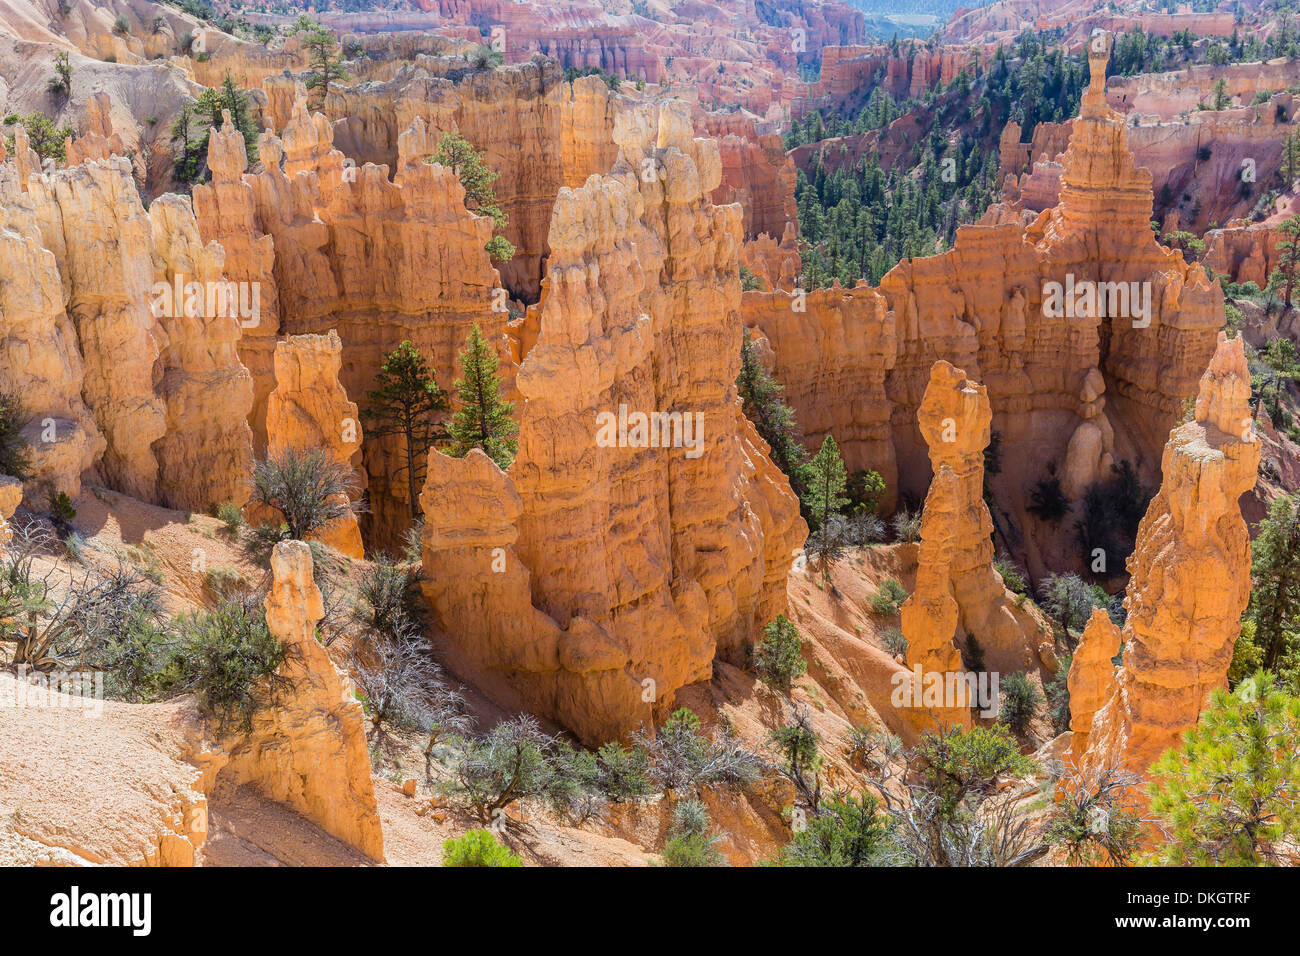 Hoodoo rock formations from the Fairyland Trail, Bryce Canyon National Park, Utah, United States of America, North America Stock Photo